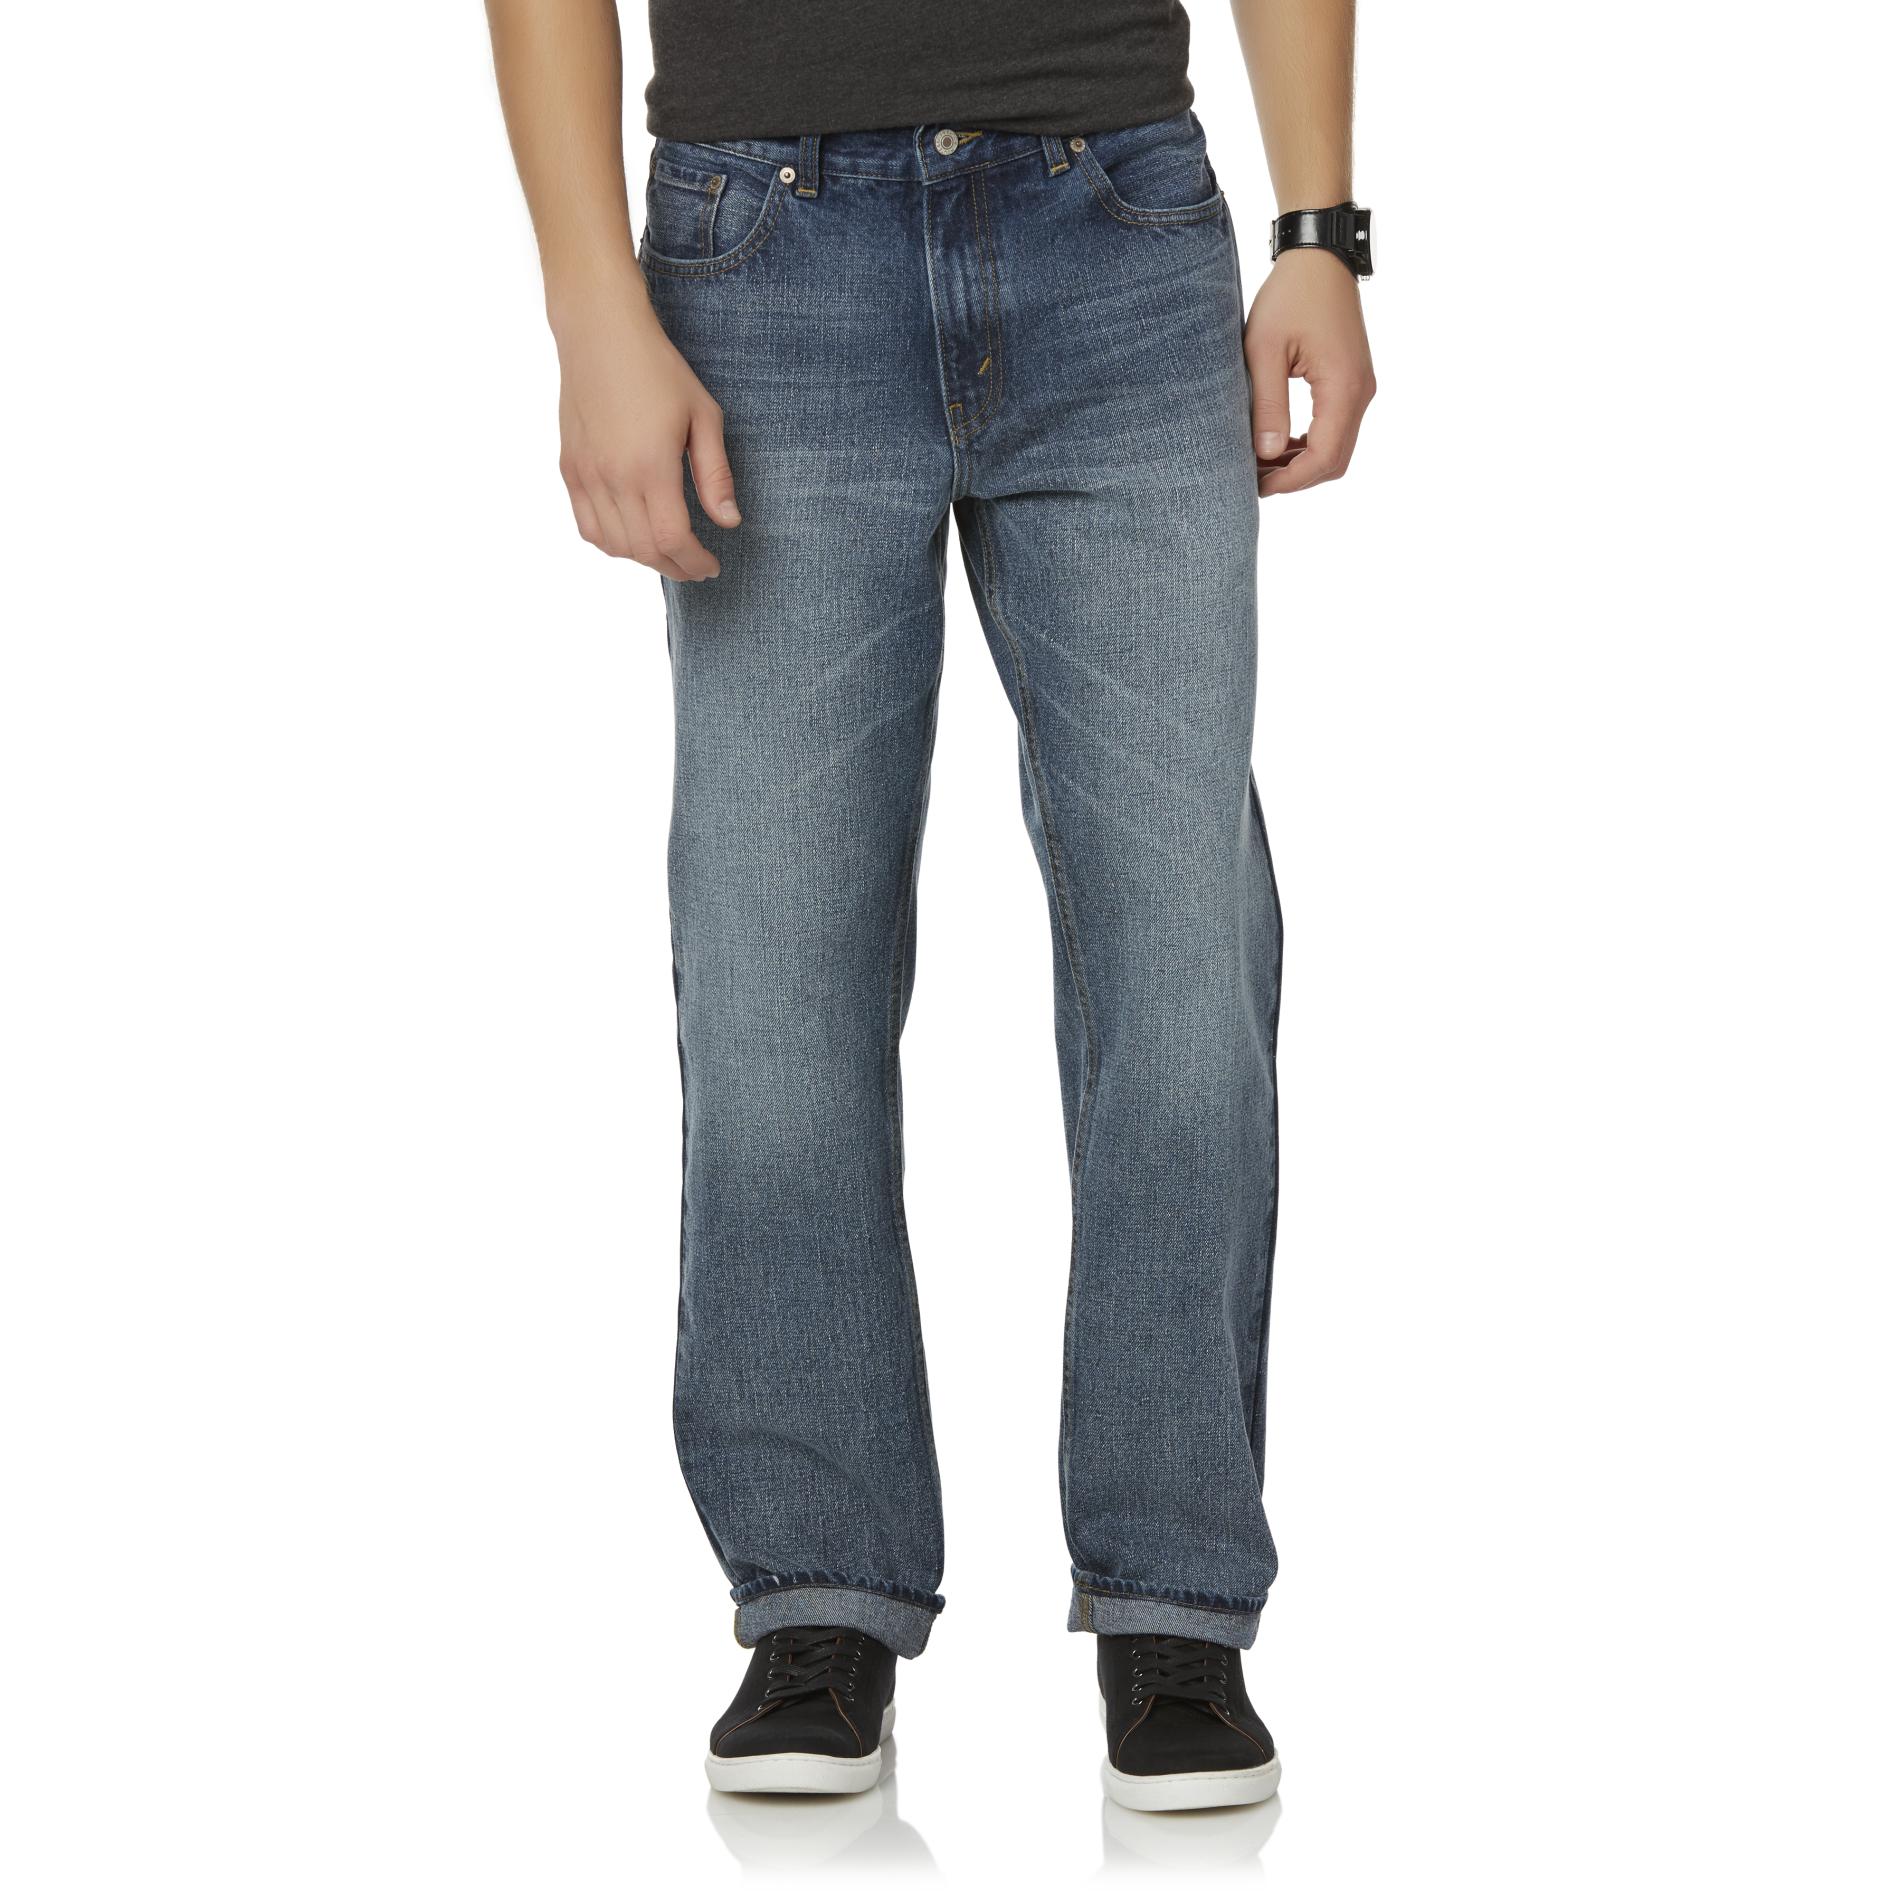 Route 66 Men's Relaxed Fit Jeans | Shop Your Way: Online Shopping ...